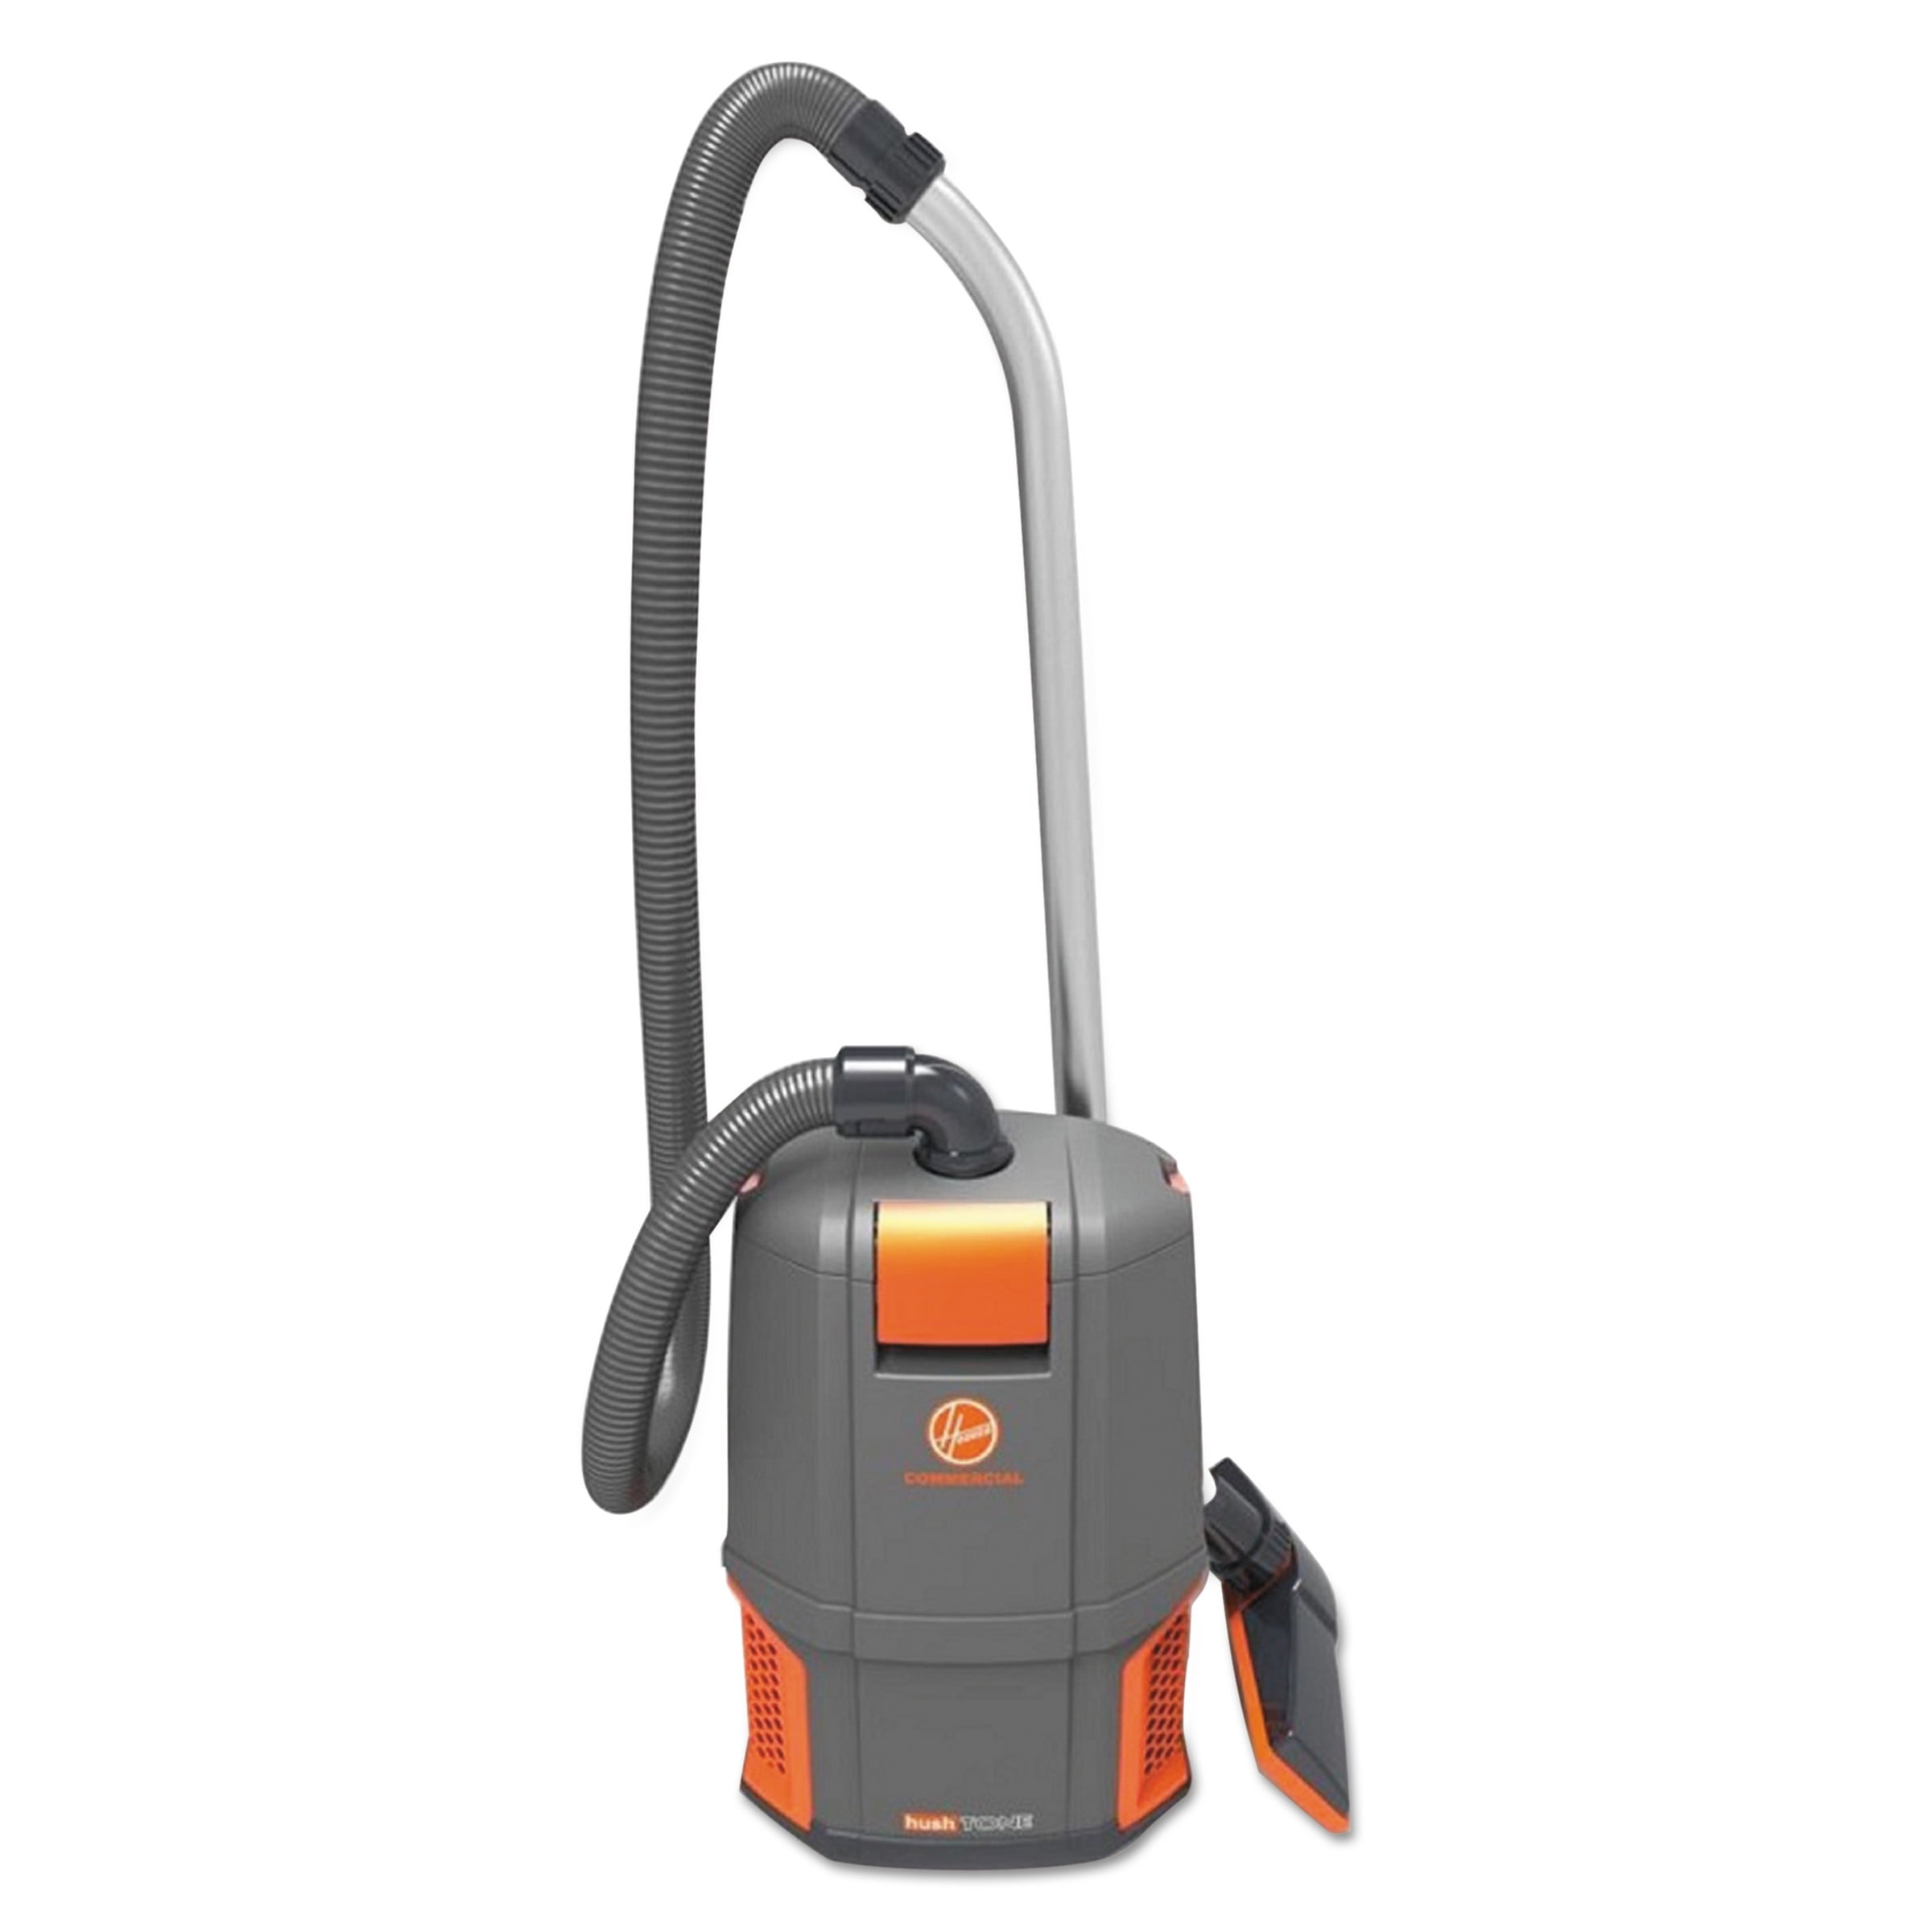 ONEPWR Handheld Cordless Leaf Blower – Hoover